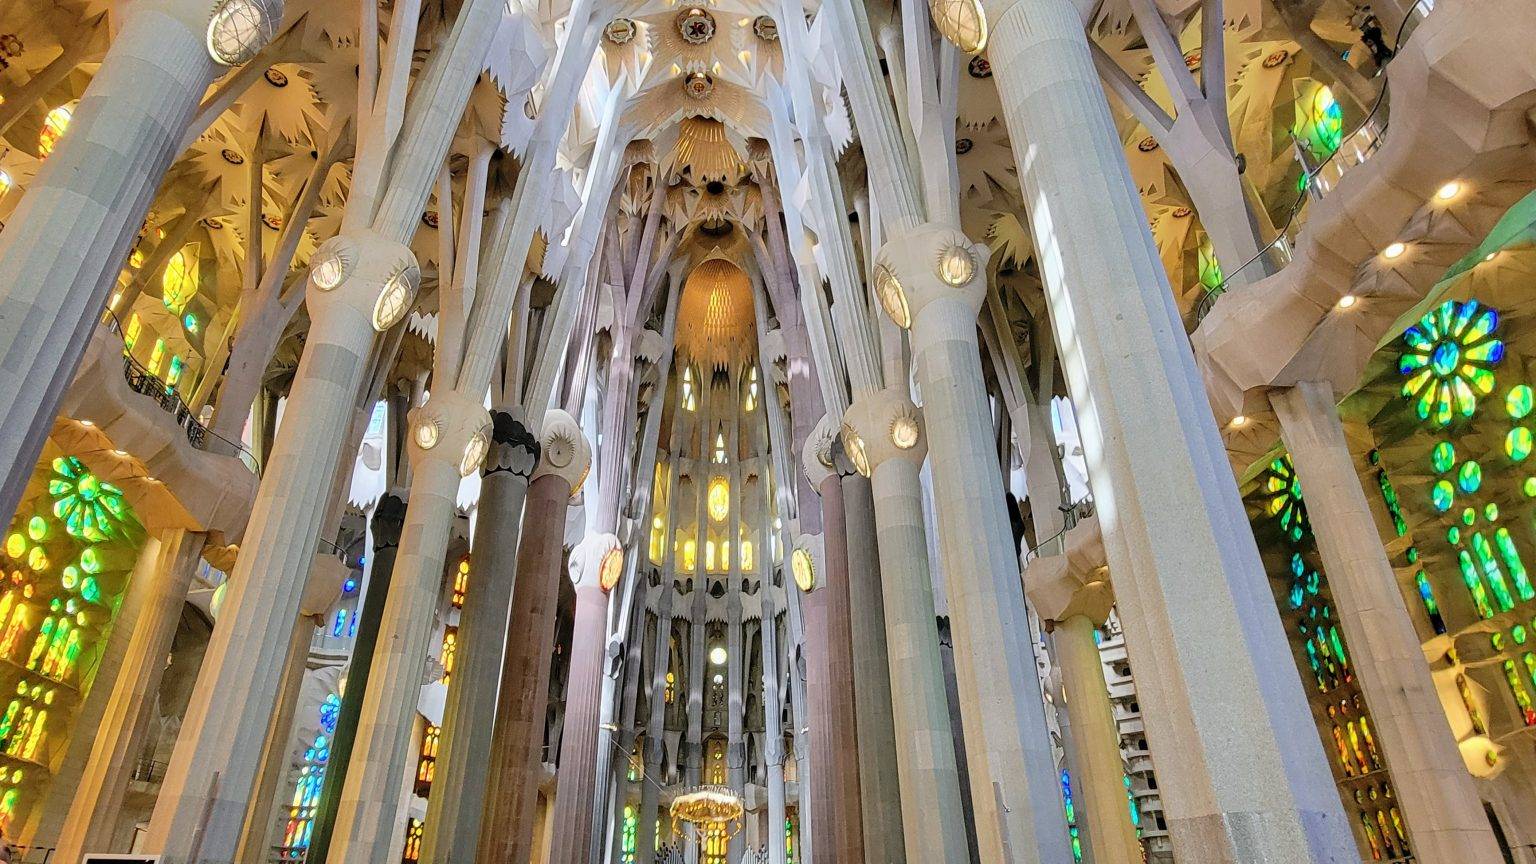 What You Need to Know Before Visiting La Sagrada Familia